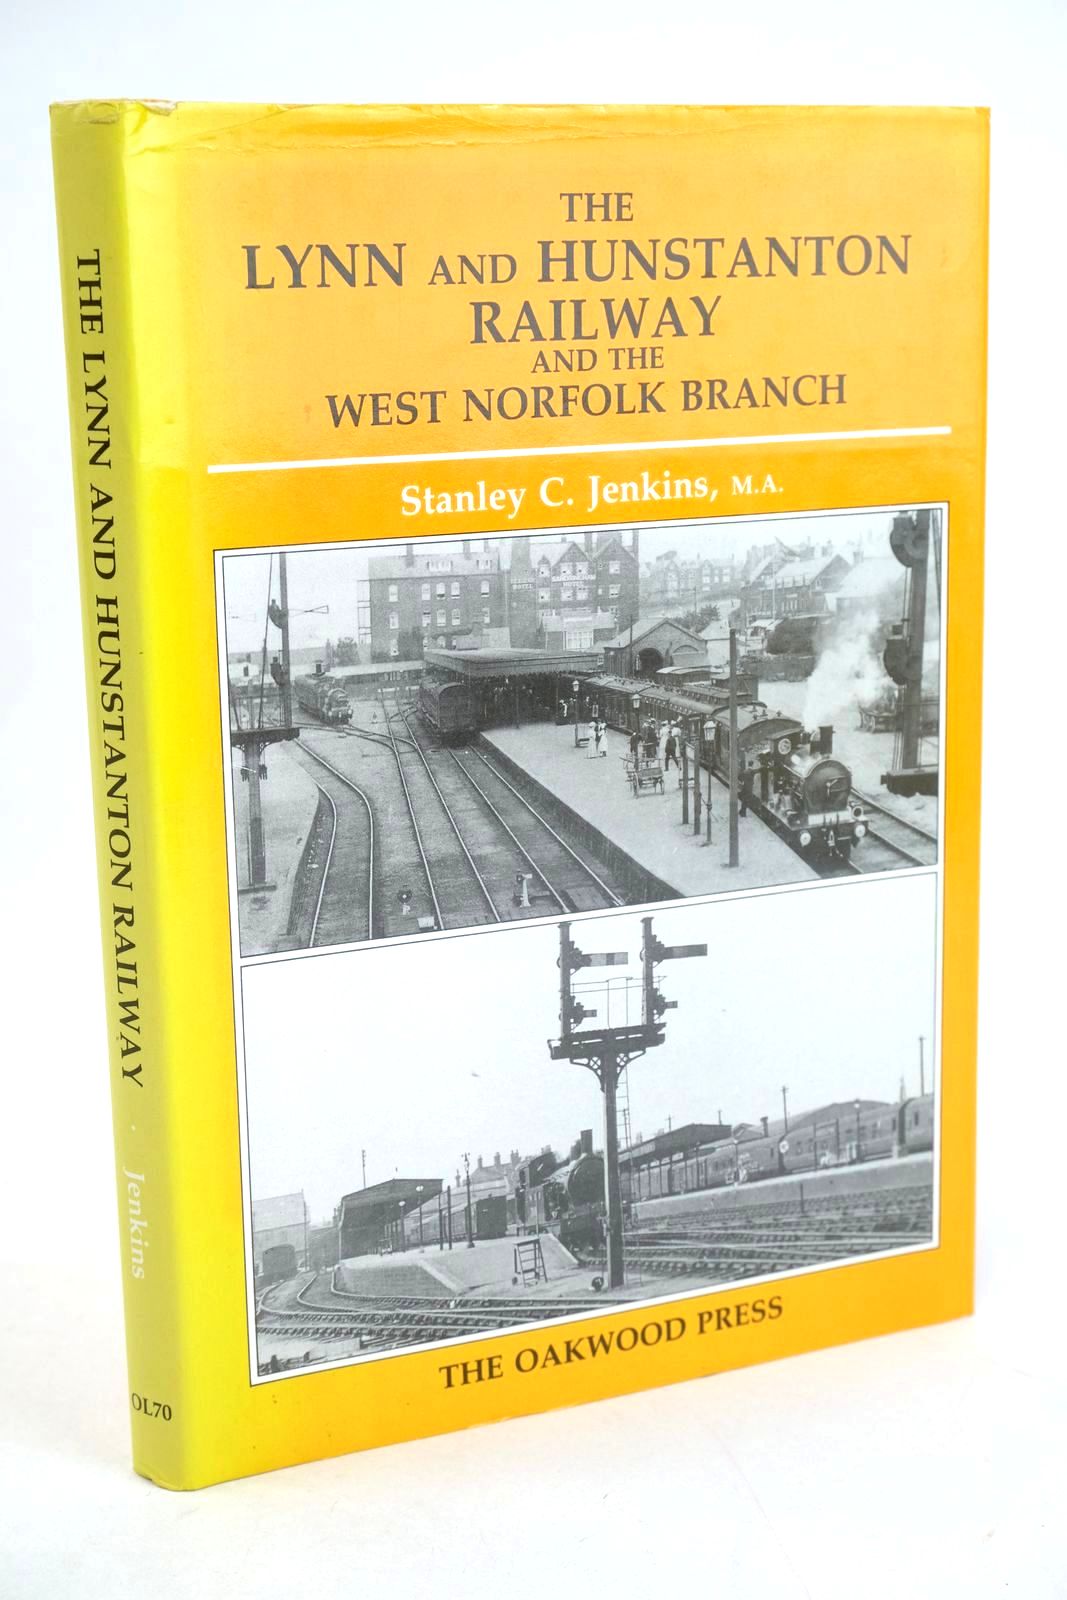 Photo of THE LYNN AND HUNSTANTON RAILWAY AND THE WEST NORFOLK BRANCH written by Jenkins, Stanley C. published by The Oakwood Press (STOCK CODE: 1327495)  for sale by Stella & Rose's Books